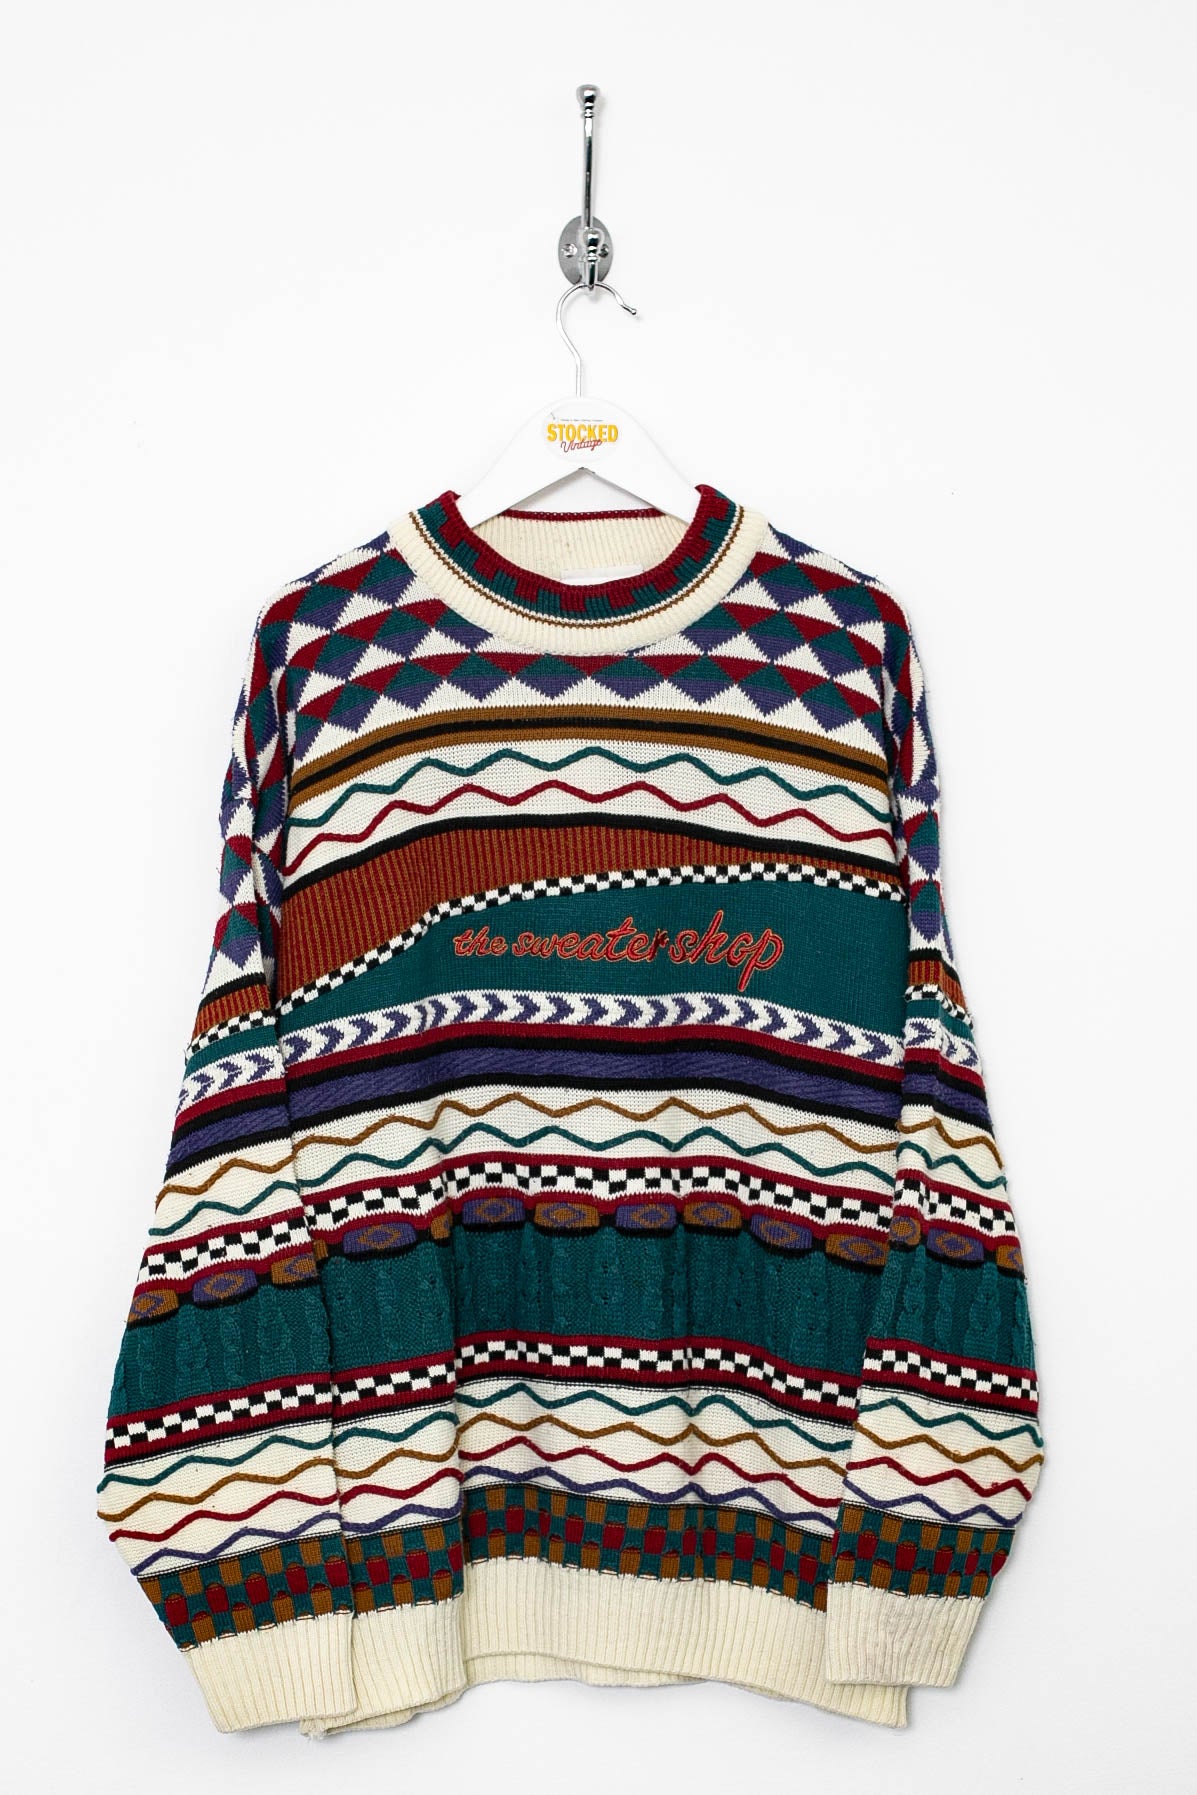 00s The Sweater Shop Coogi Style Knit Jumper (L)